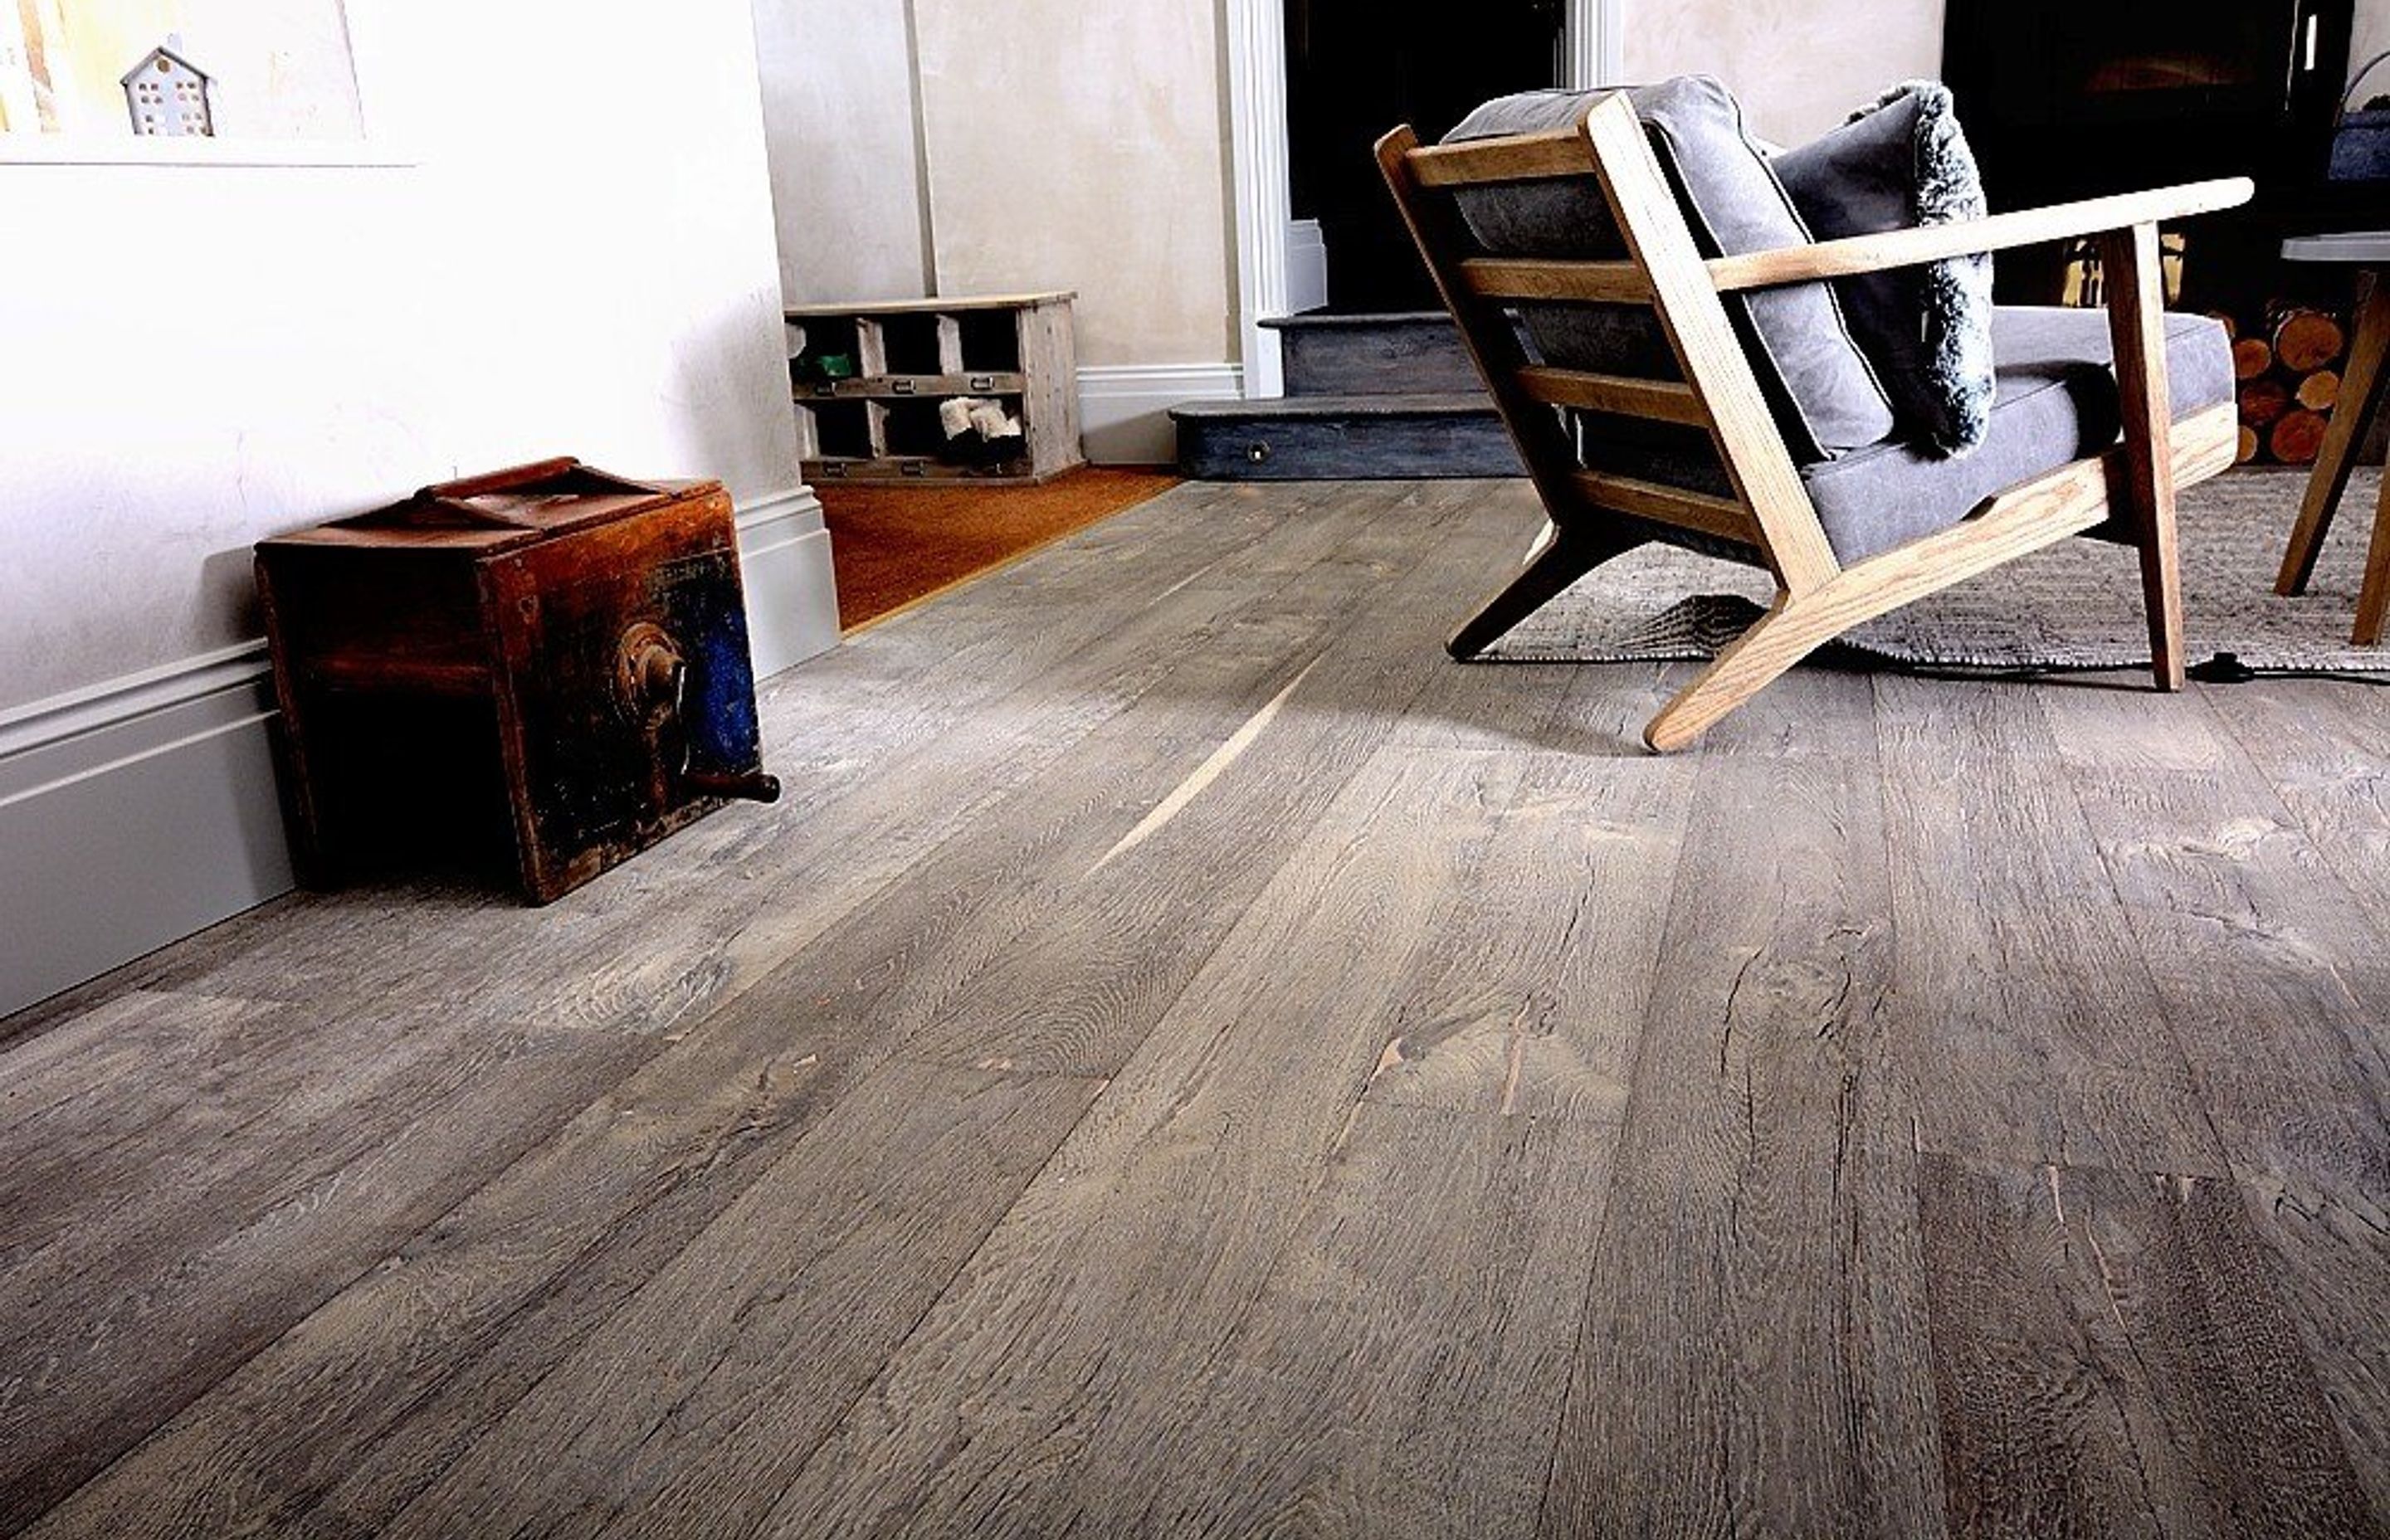 Textured Flooring - What’s the difference?